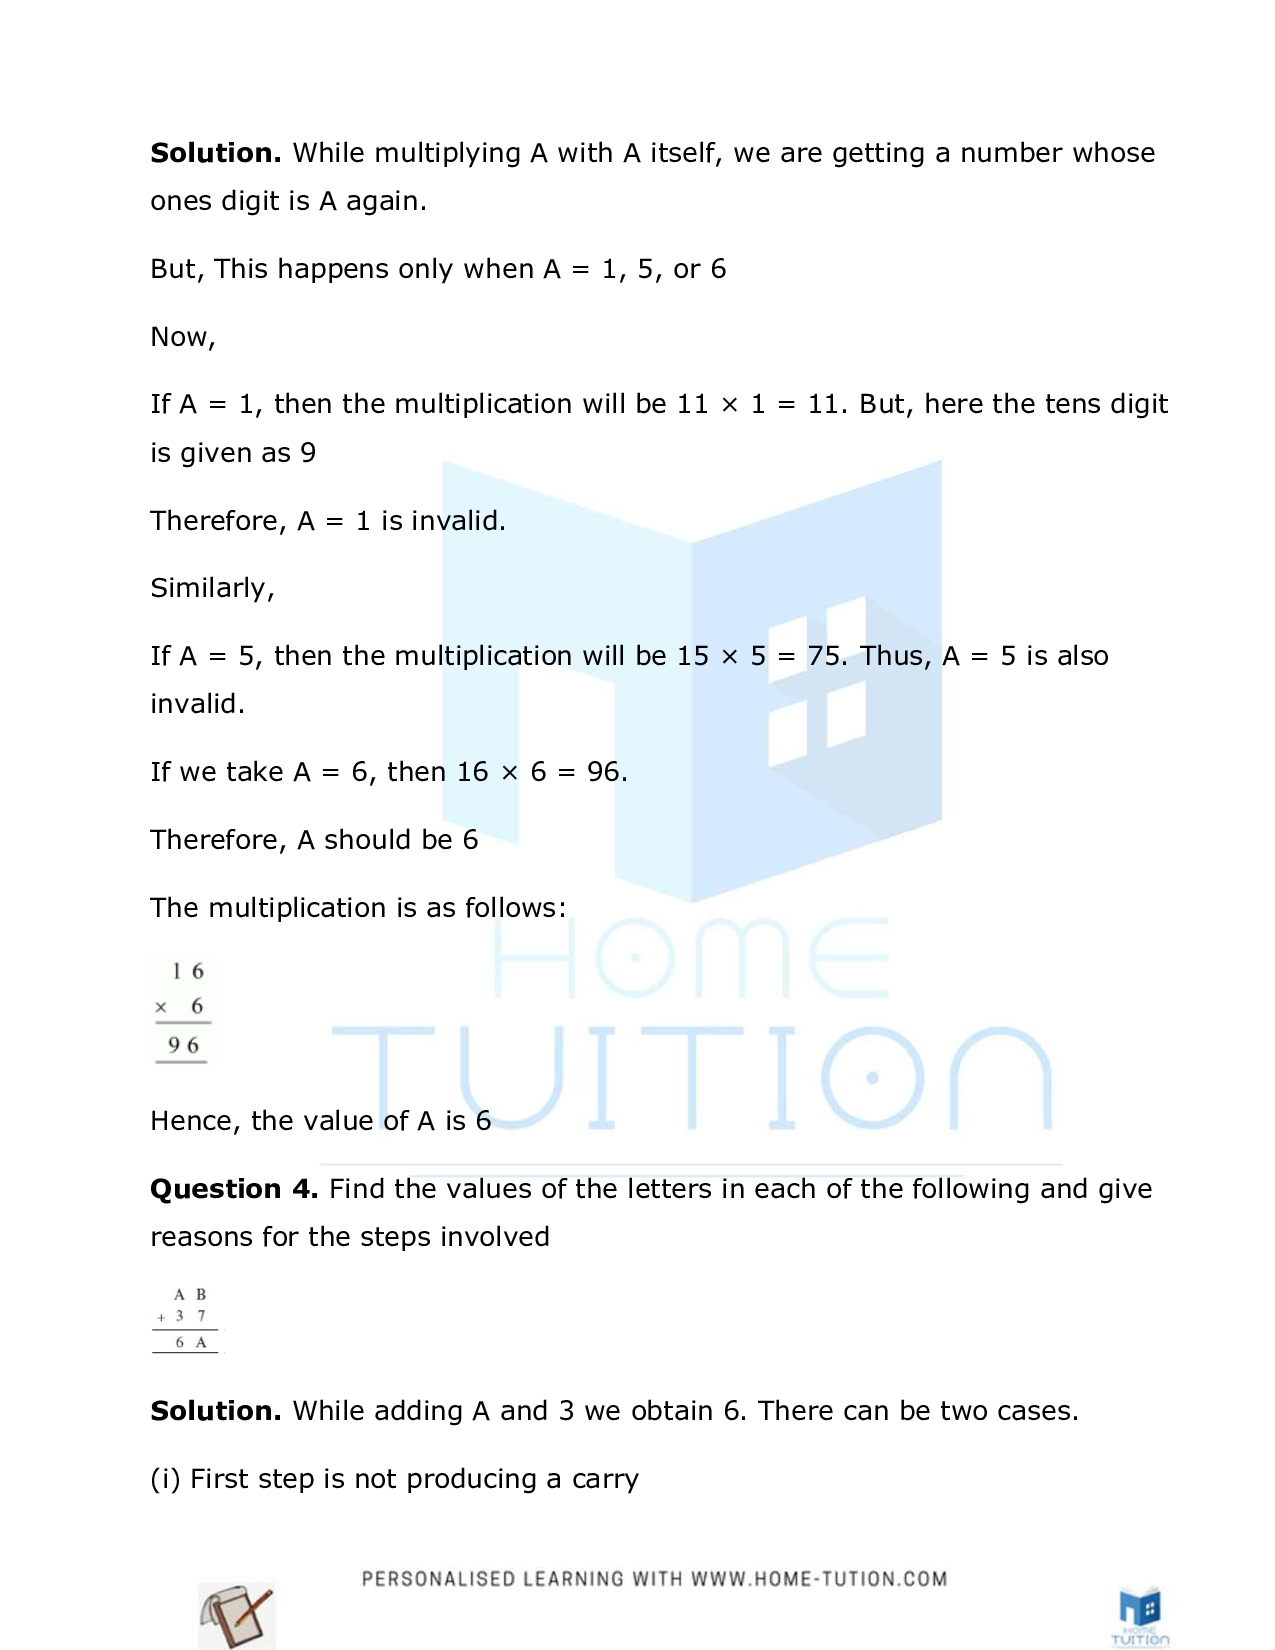 ncert-solutions-for-class-8-maths-chapter-16-playing-with-numbers